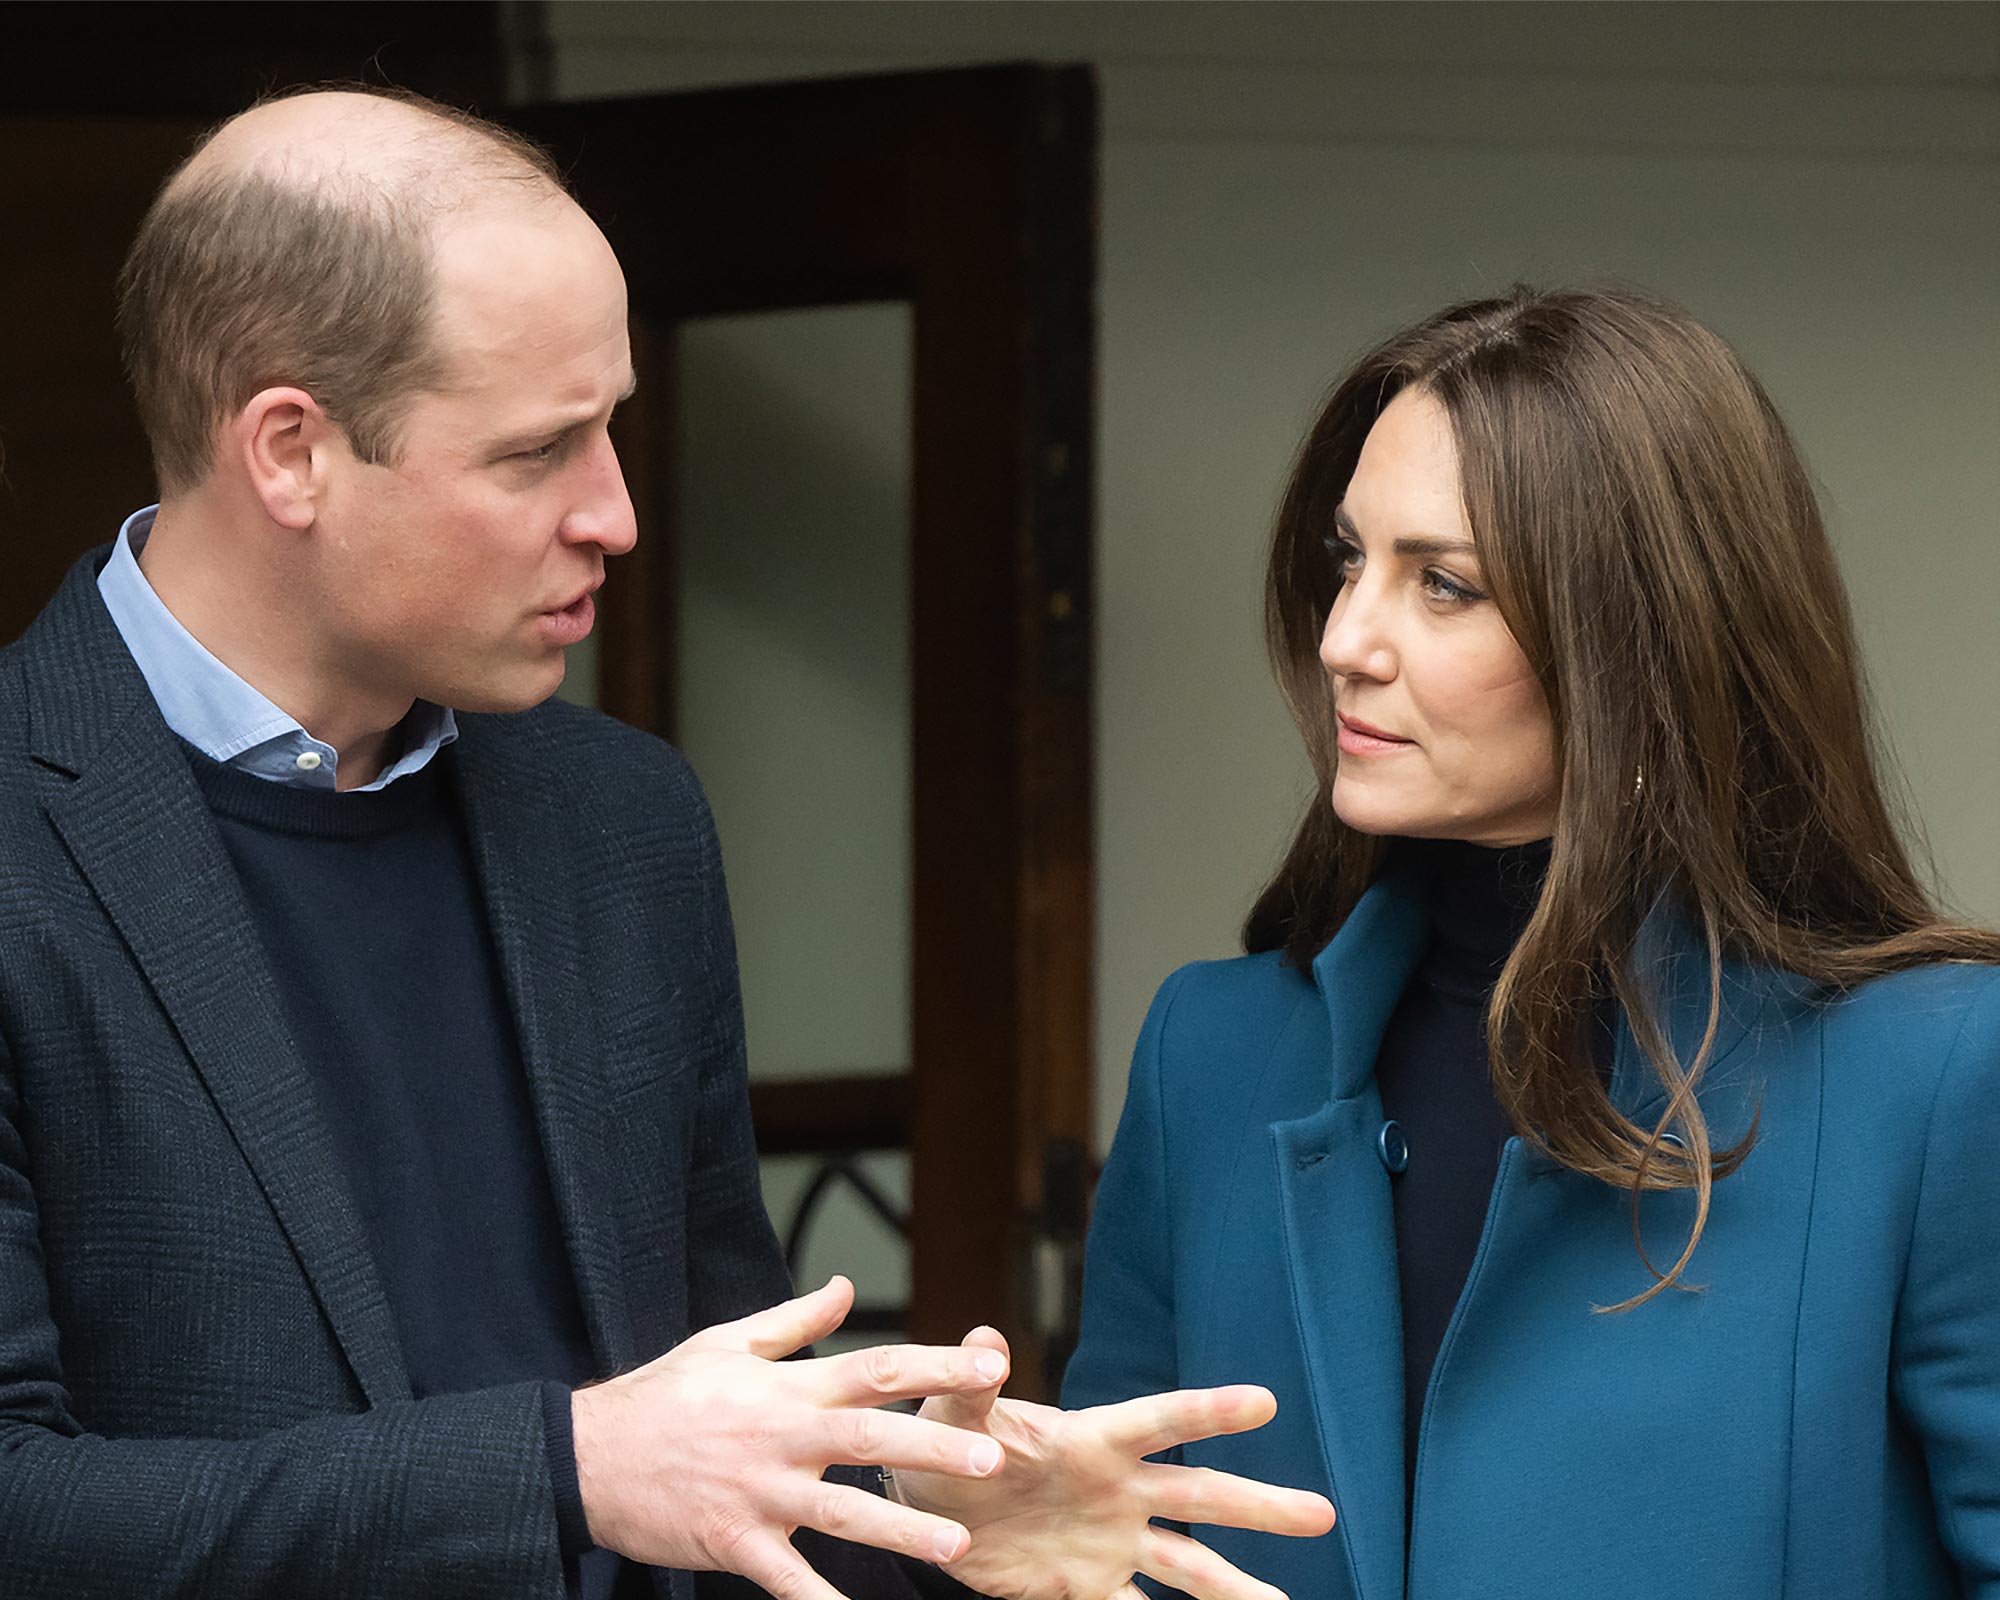 Prince William and Kate Middleton React to Support After Cancer Diagnosis